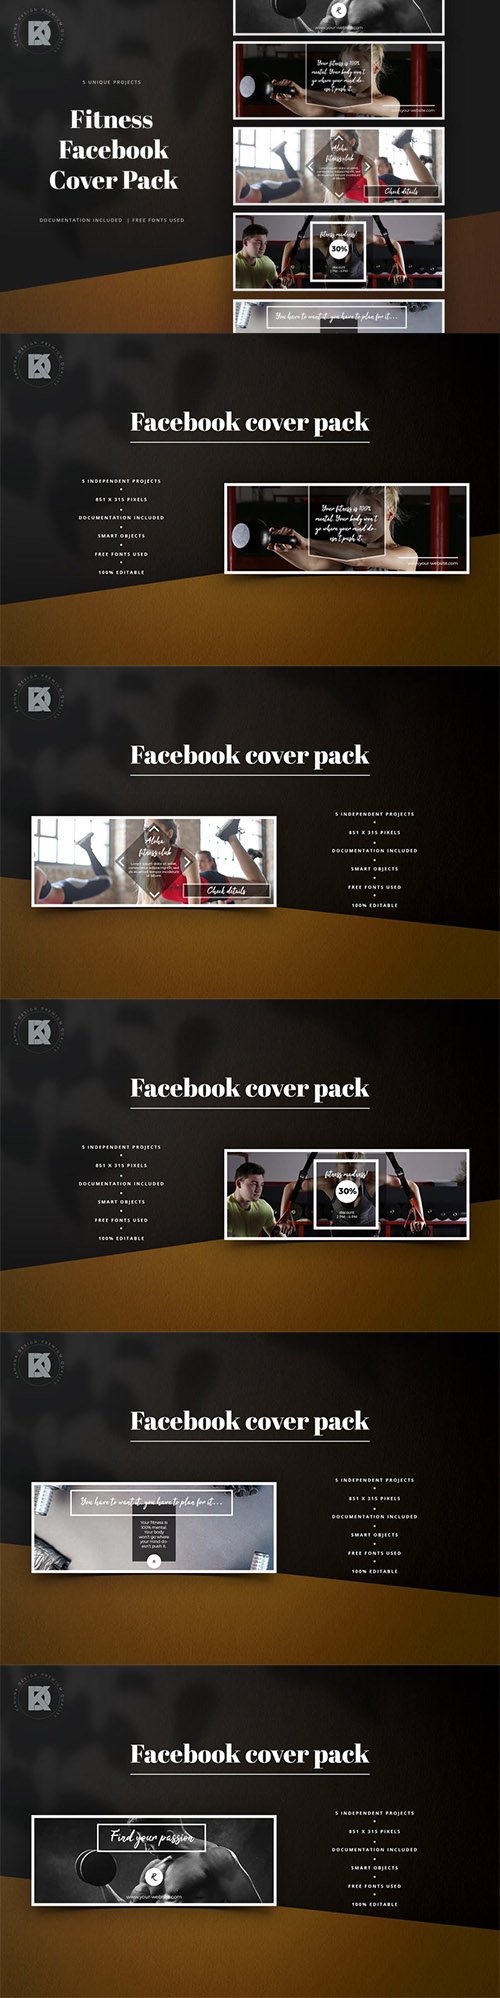 Fitness Facebook Cover Pack